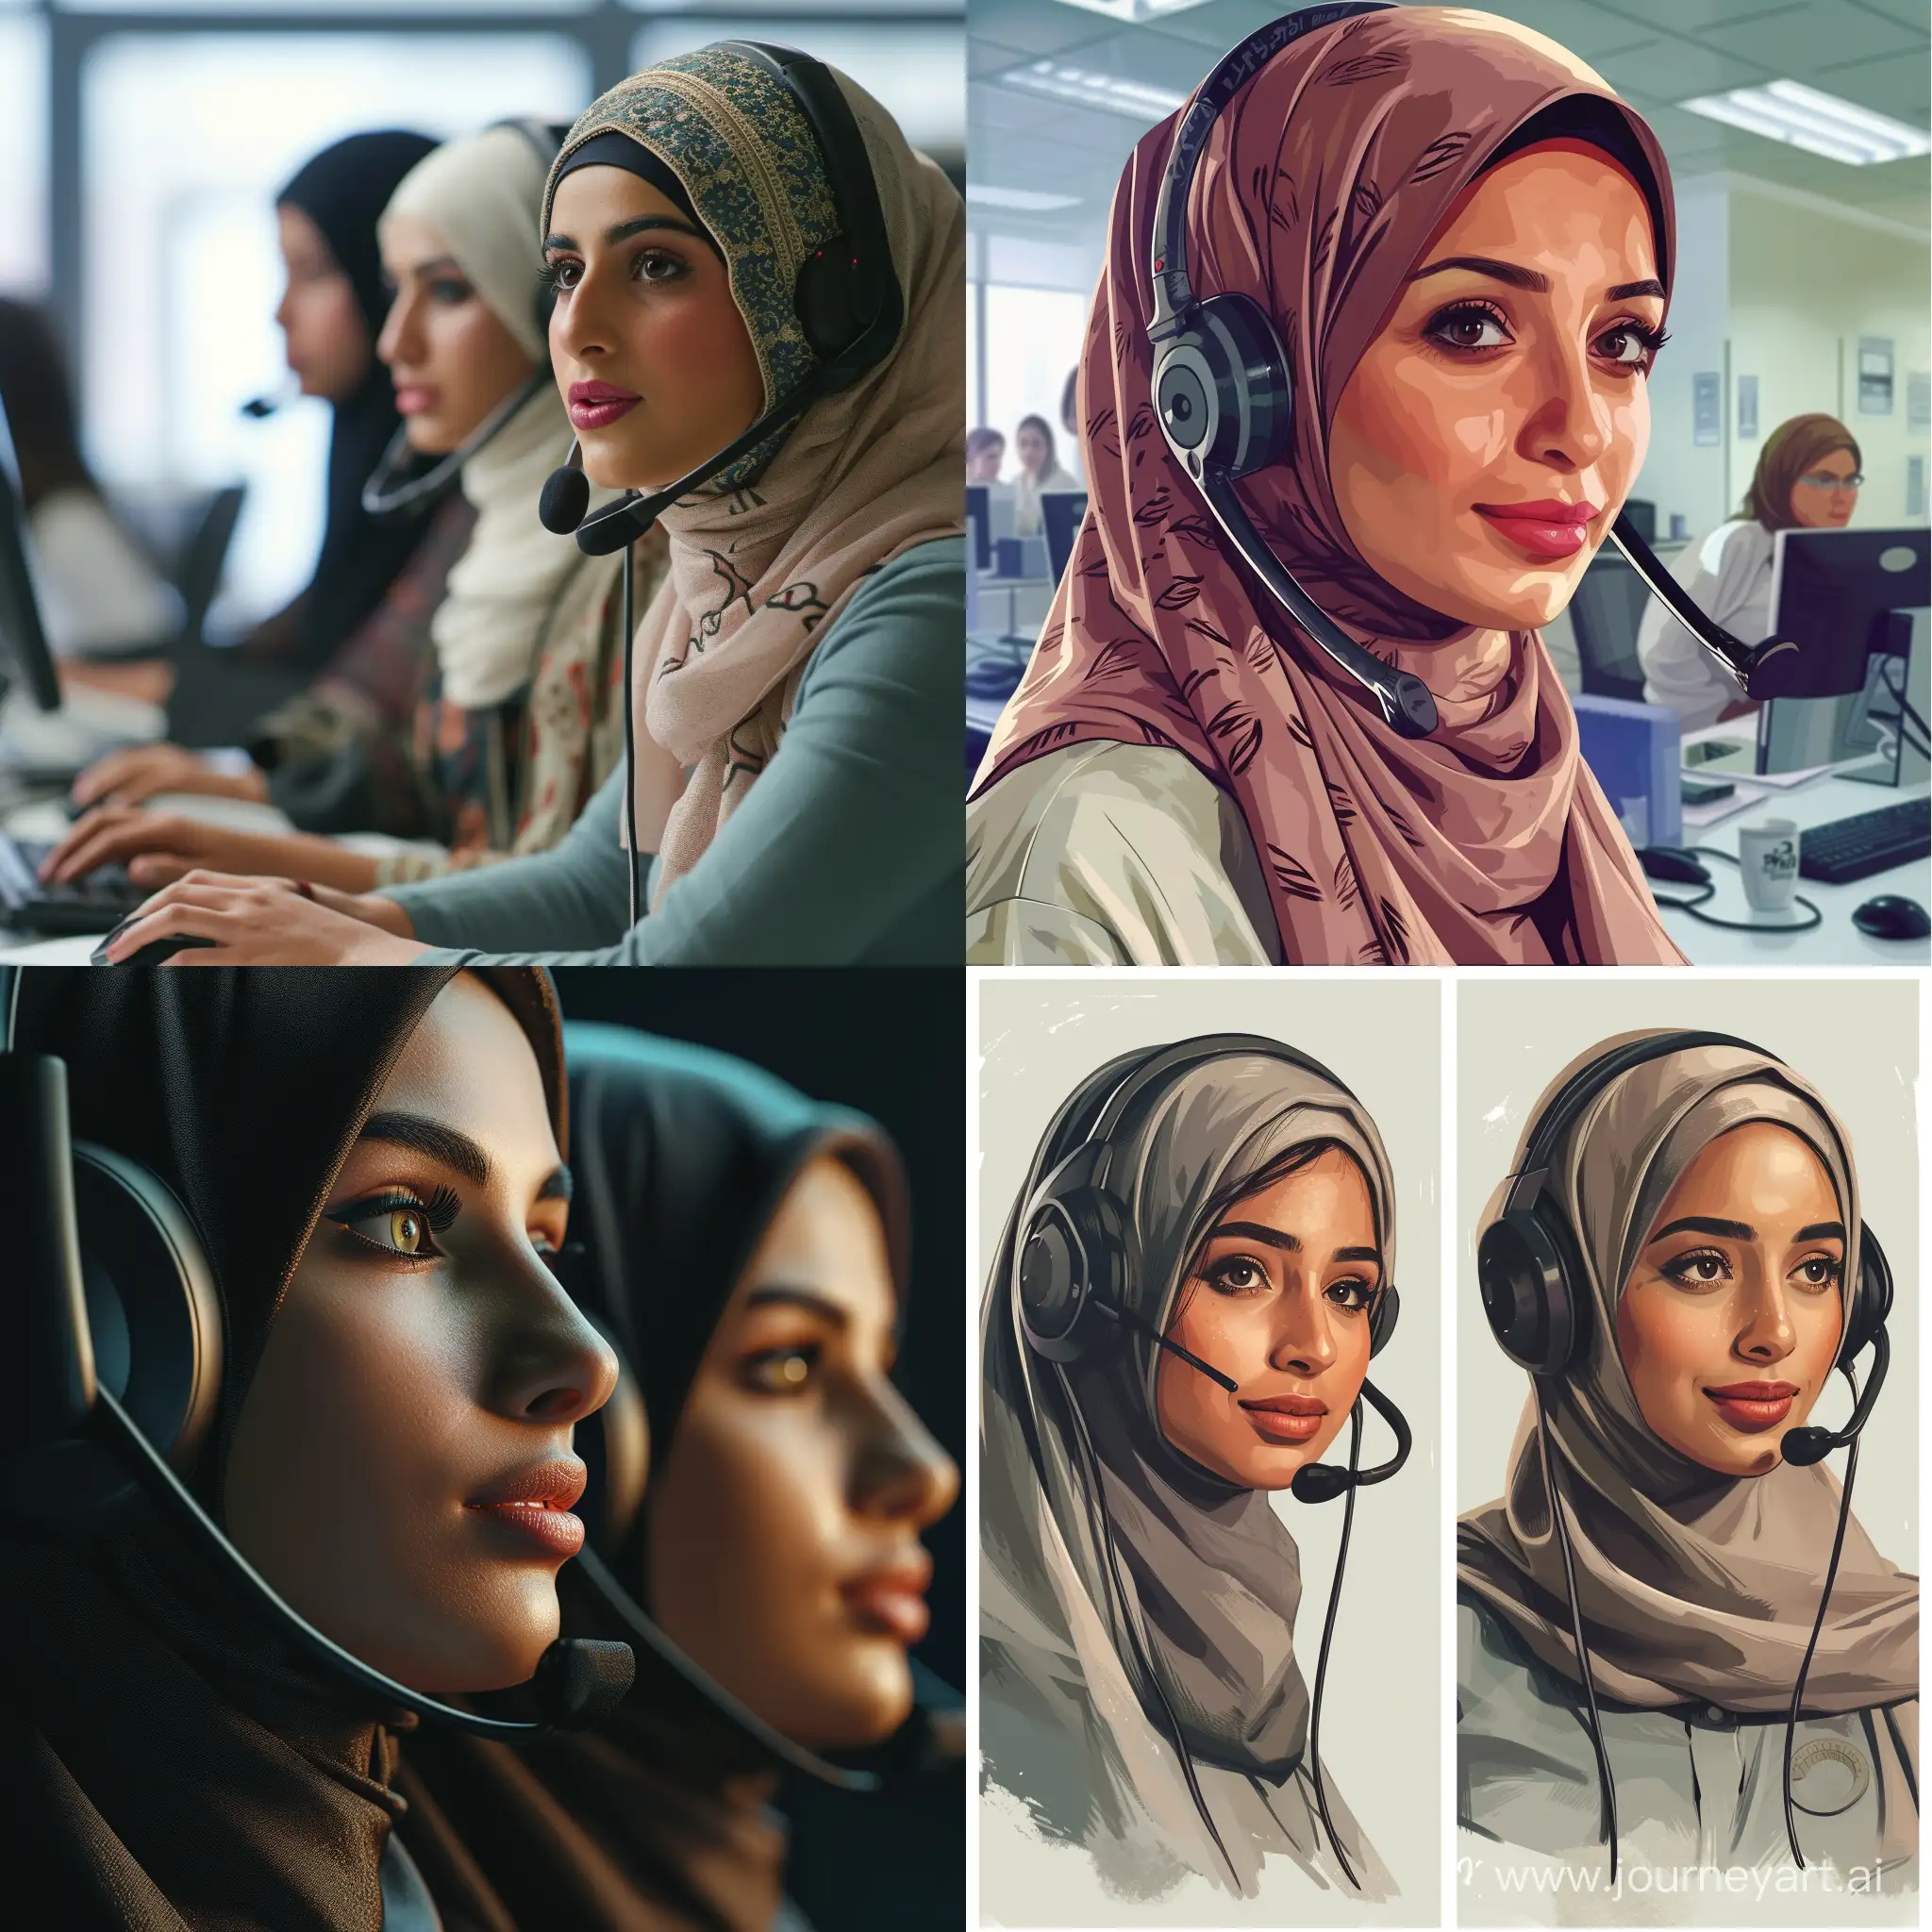 Generate image, very realistic image of algerian looking women in office that represent customers service. It must show that it is a customer service representative. The women must be very realistic looking. Algerian looking women. 